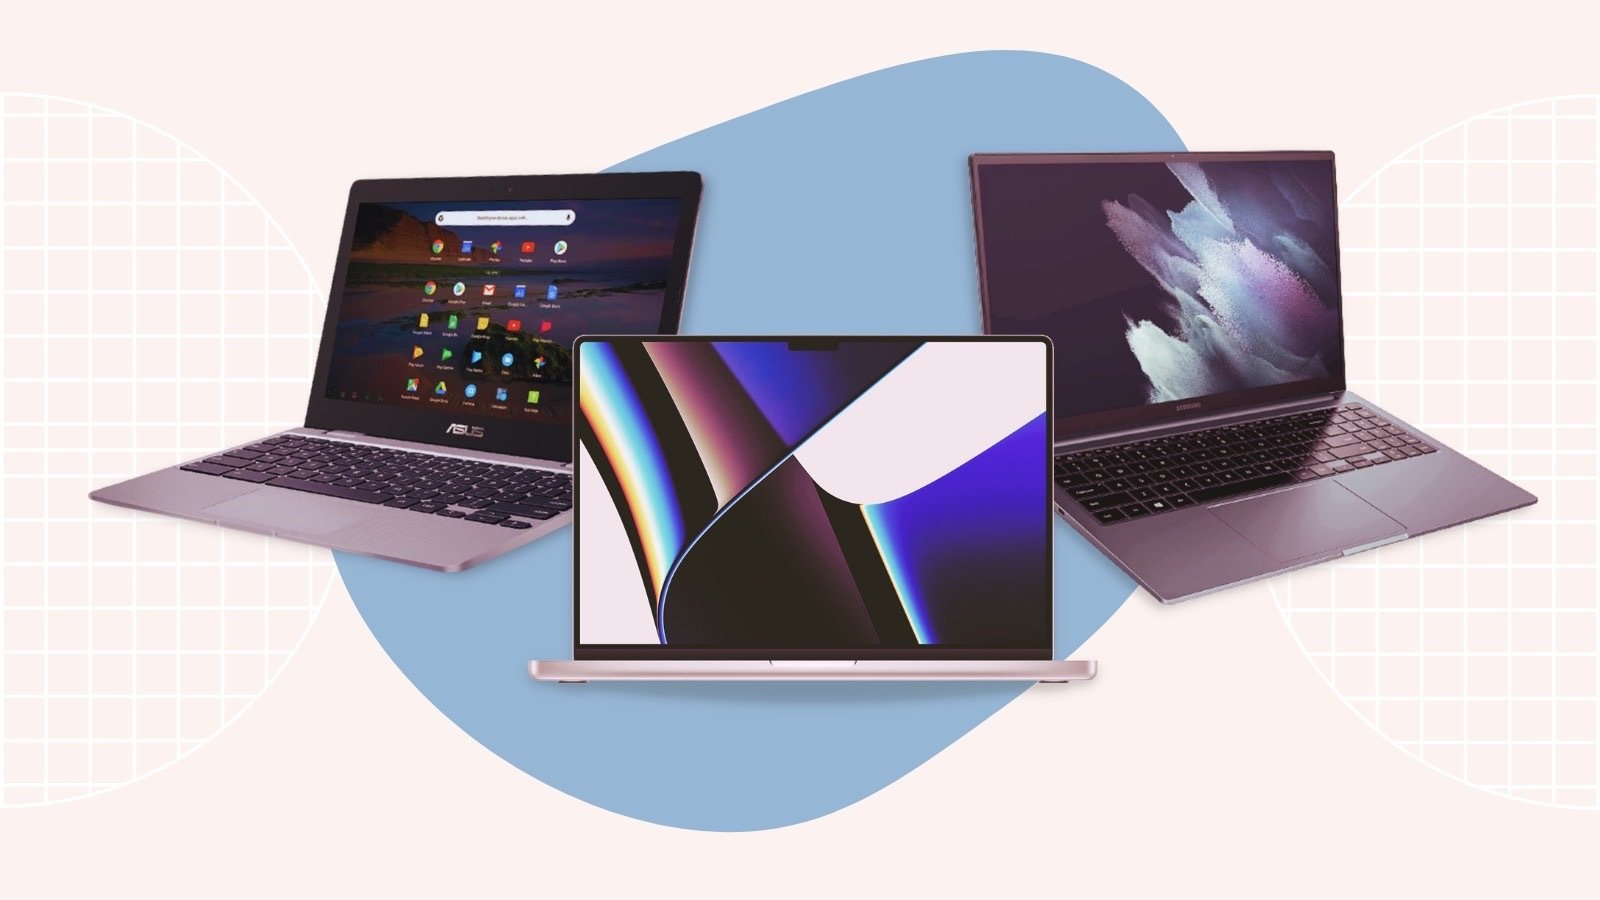 Three laptops featured in amazon's early black friday sale against a blue and pink geometric background.